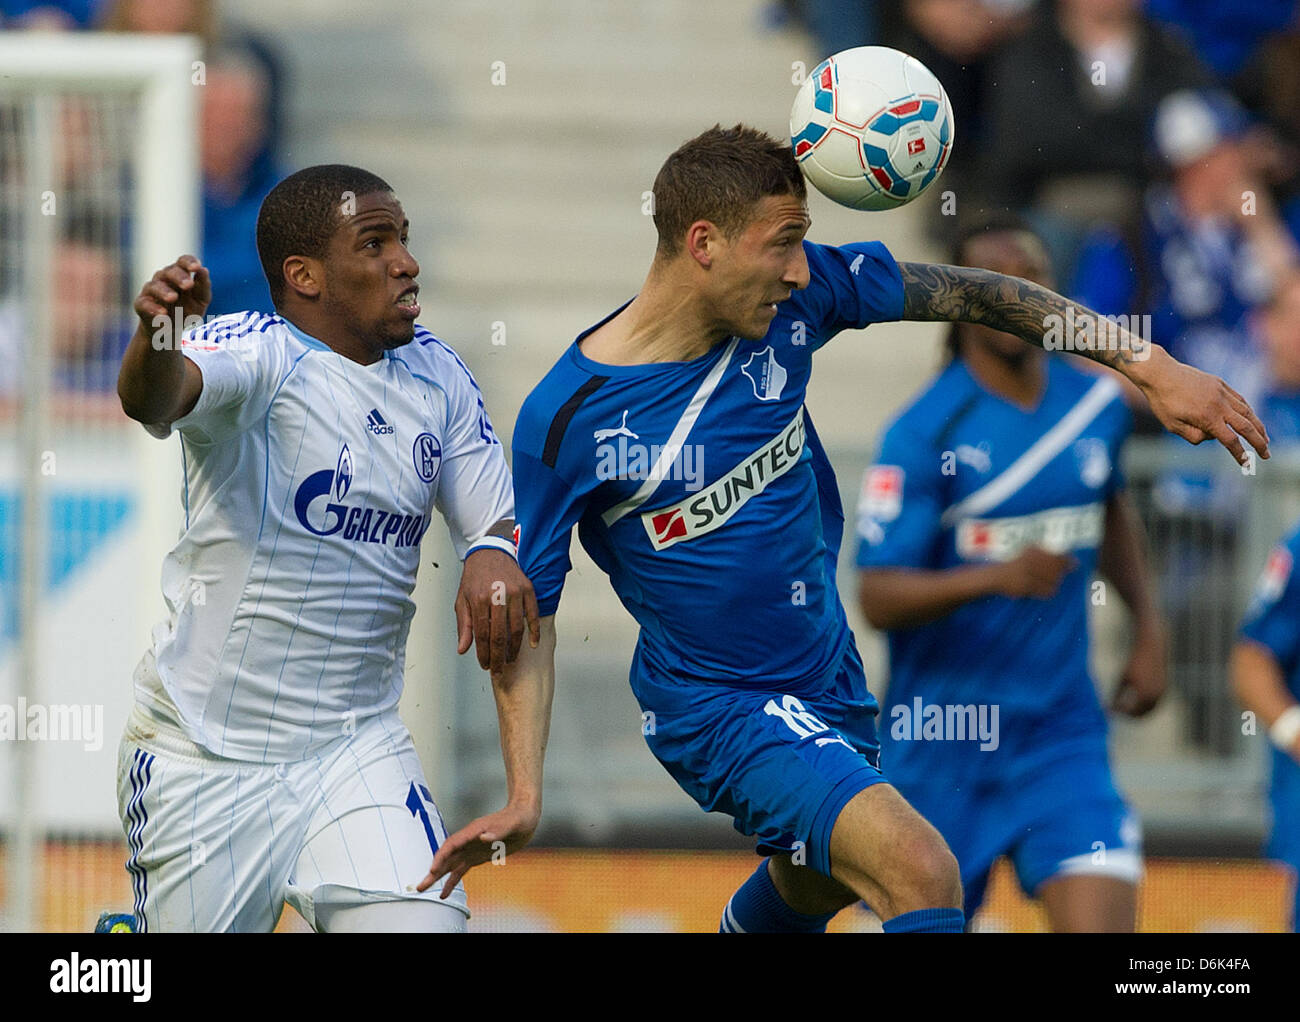 Hoffenheim's Fabian Johnson (R) vies for the ball with Schalke's Jefferson Farfan during the Bundeliga soccer match between 1899 Hoffenheim and FC Schalke 04 at the Rhein-Neckar-Arena in Sinsheim, Germany, 01 April 2012. Photo: UWE ANSPACH  (ATTENTION: EMBARGO CONDITIONS! The DFL permits the further  utilisation of the pictures in IPTV, mobile services and other new  technologies o Stock Photo